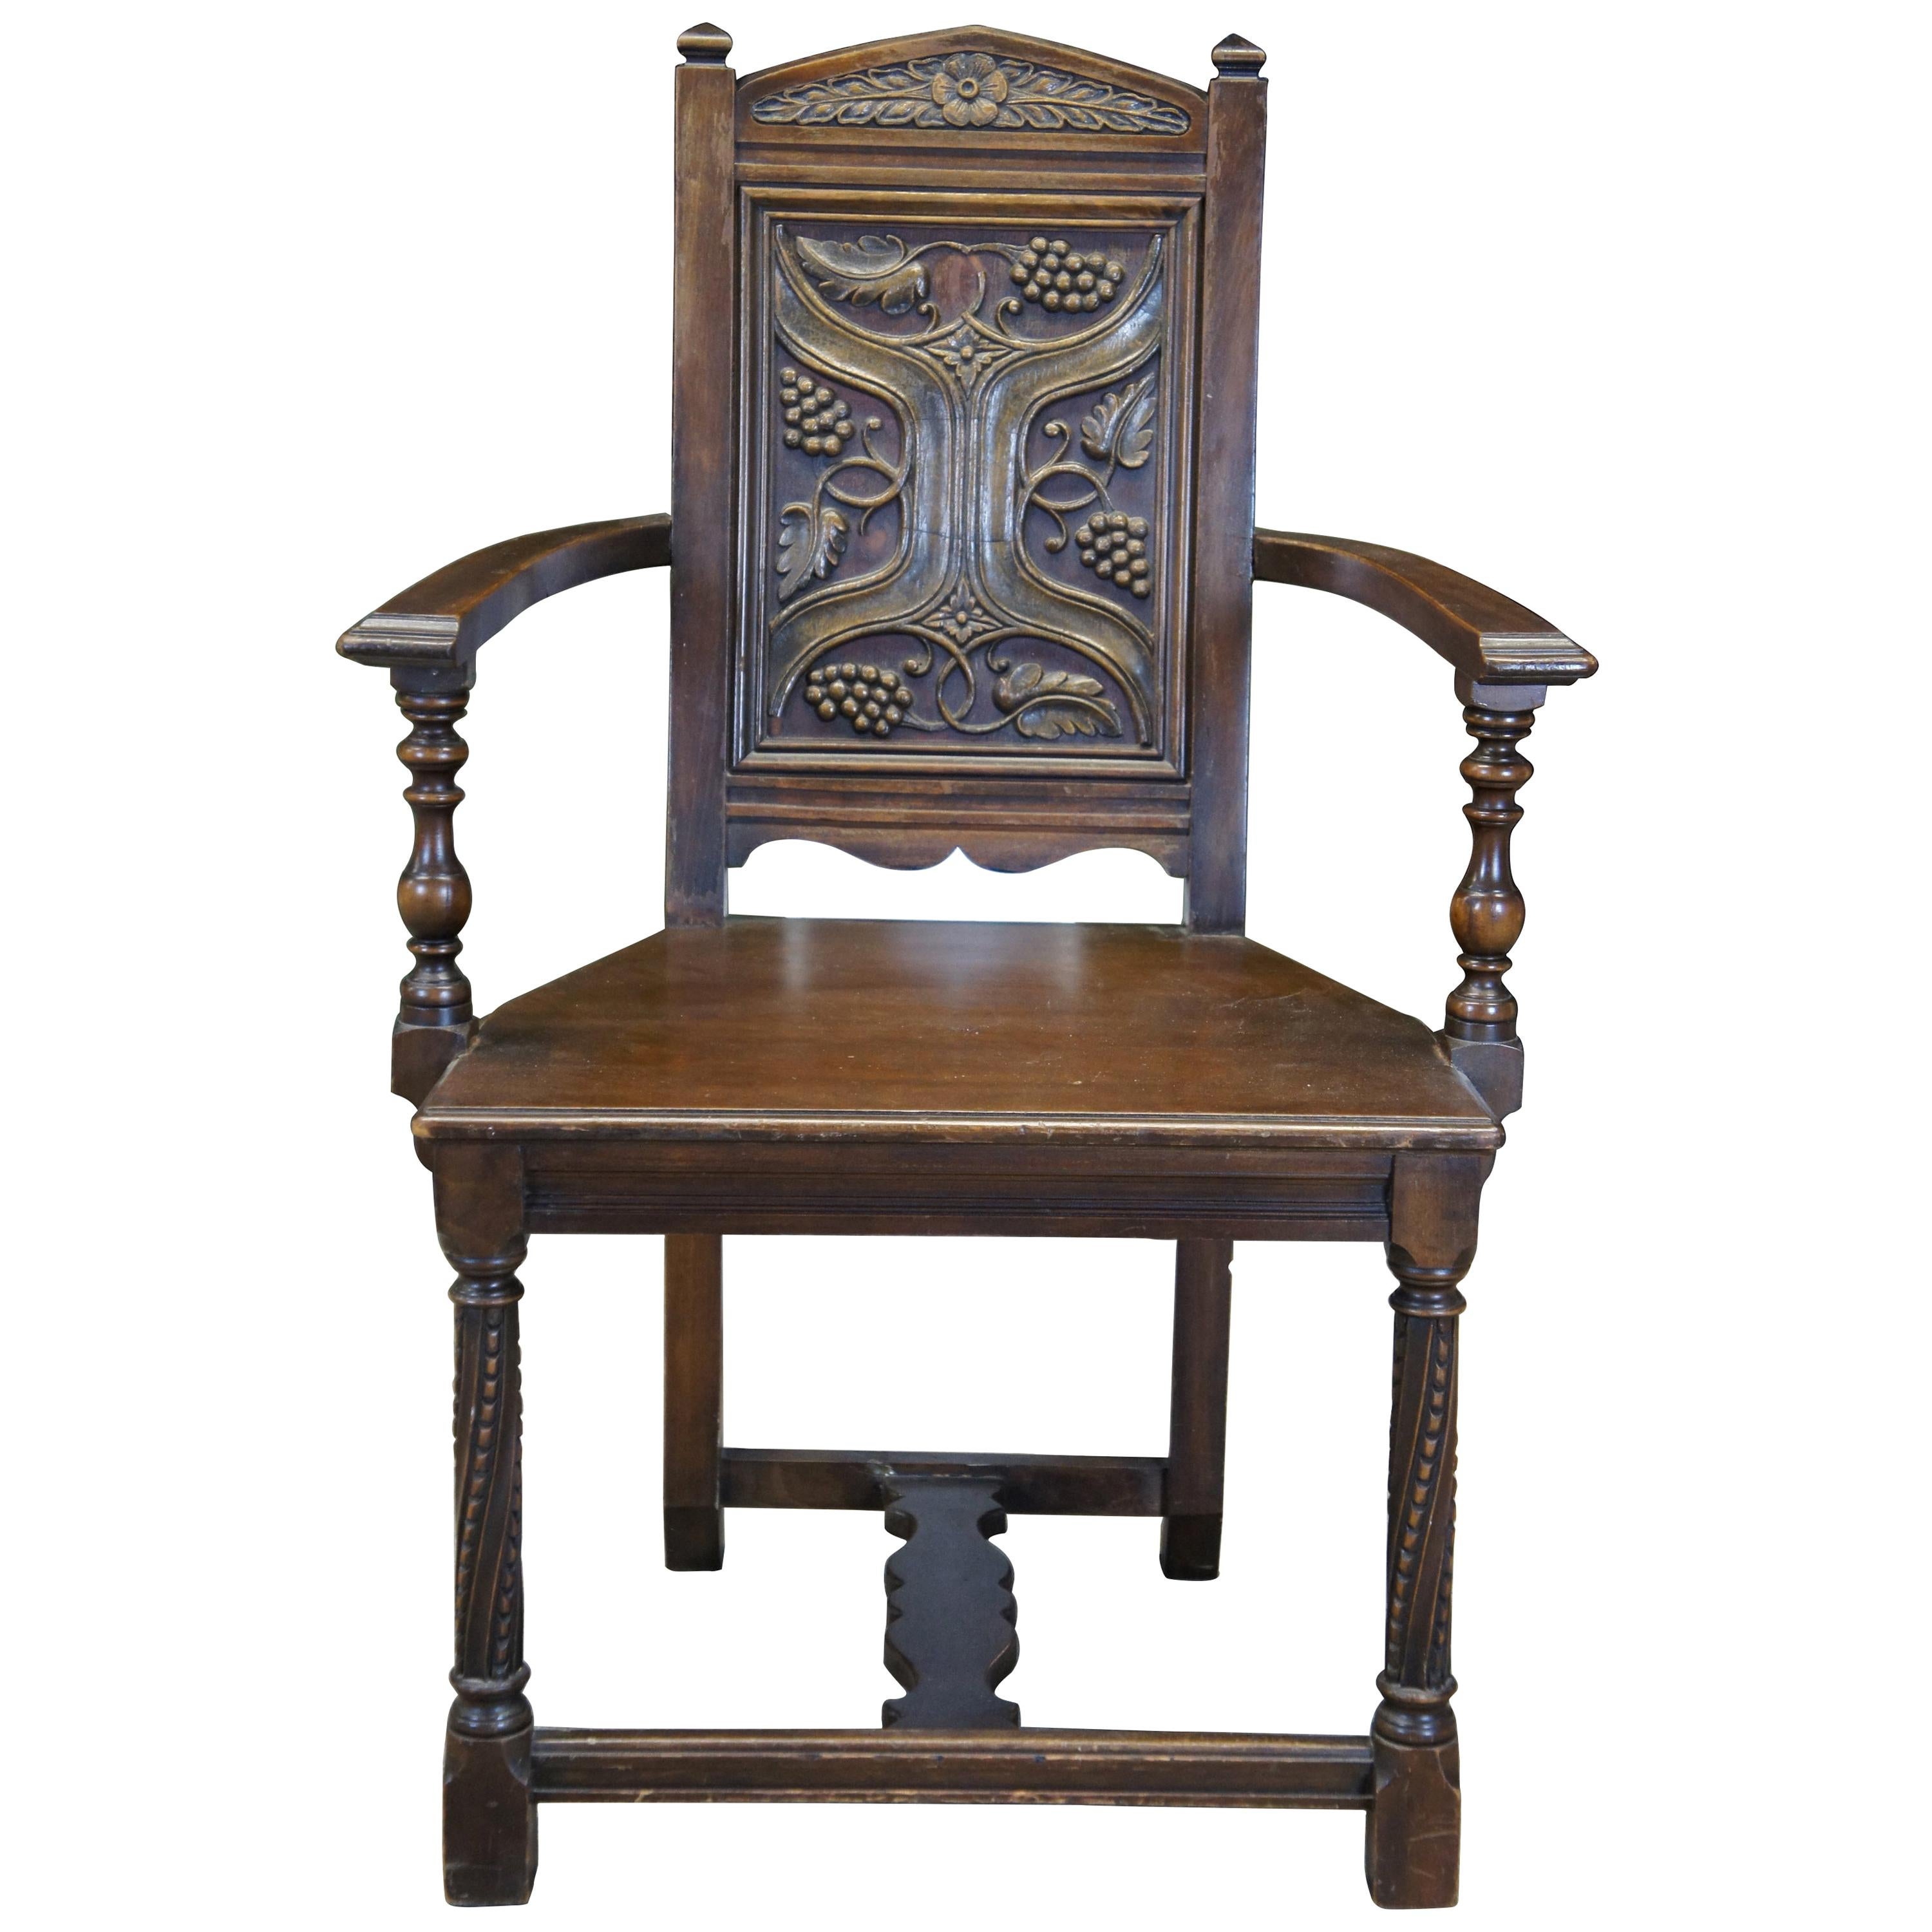 American Furniture Antique Gothic Revival Carved Walnut Office Desk Armchair